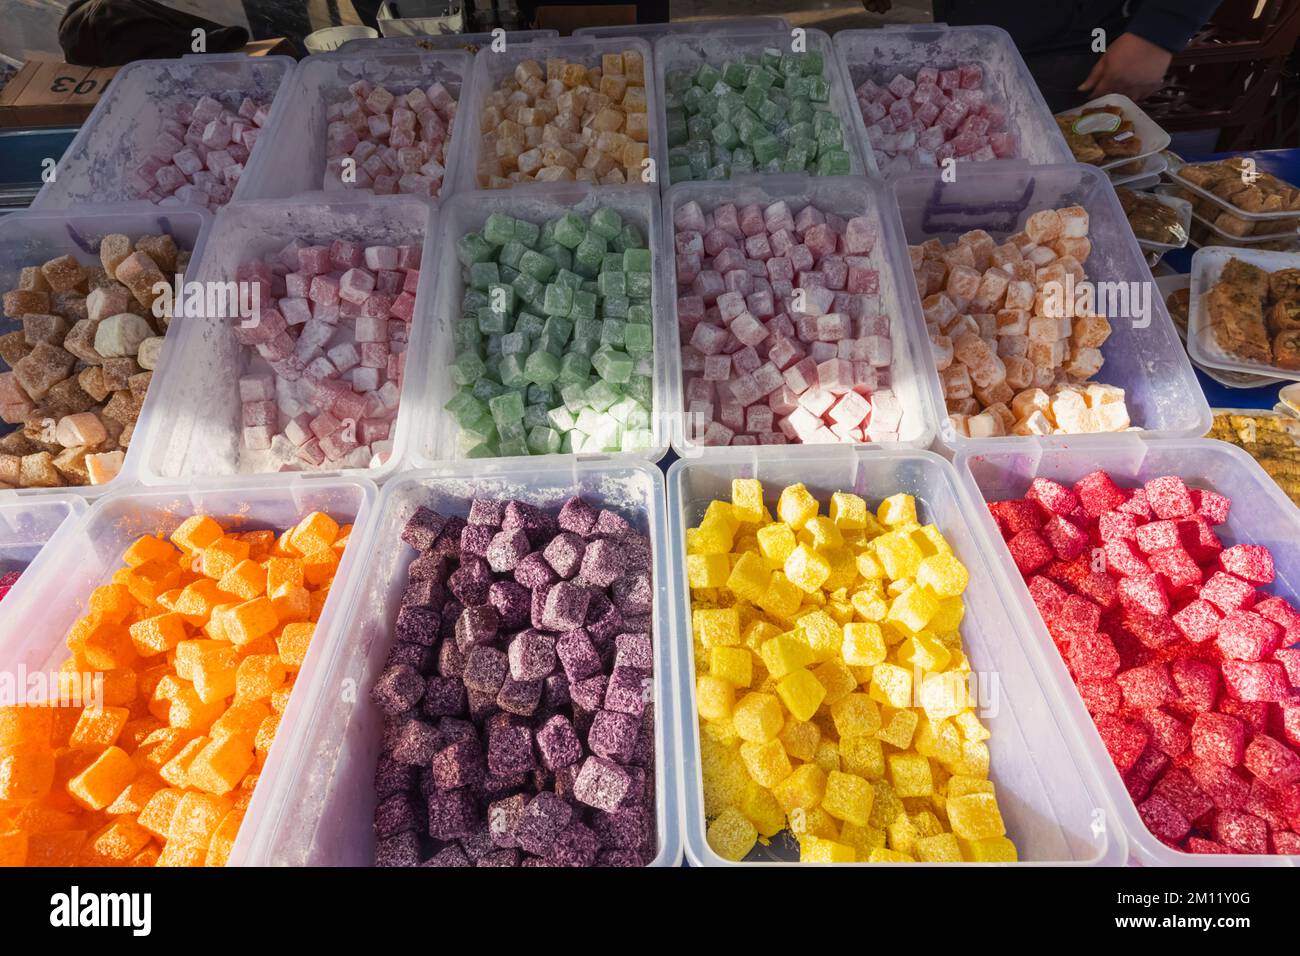 England, Dorset, Christchurch, Christchurch Market, Display of Colourful Turkish Delight Stock Photo